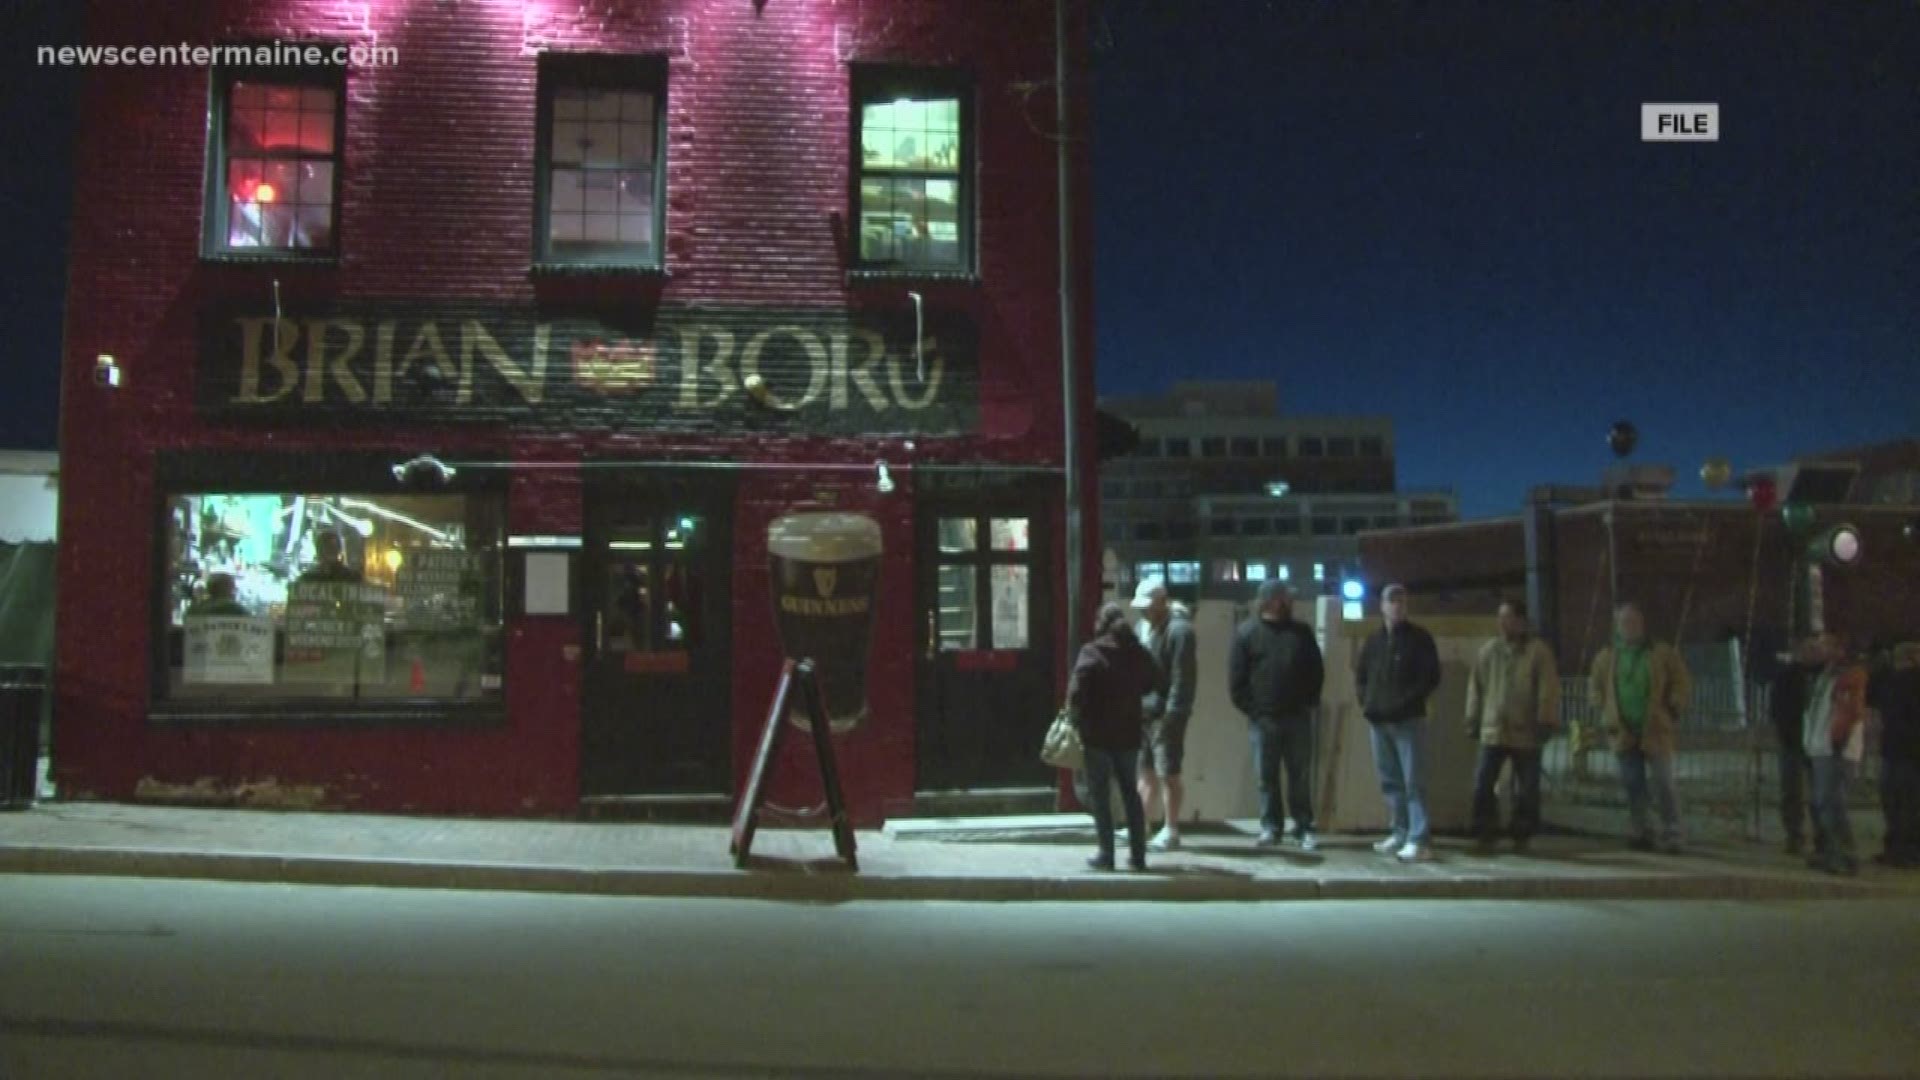 Brian Boru, one of Portland's most famous bars, is closing. The announcement was made on their facebook page. They say the bar will close on Monday at 1 a.m.